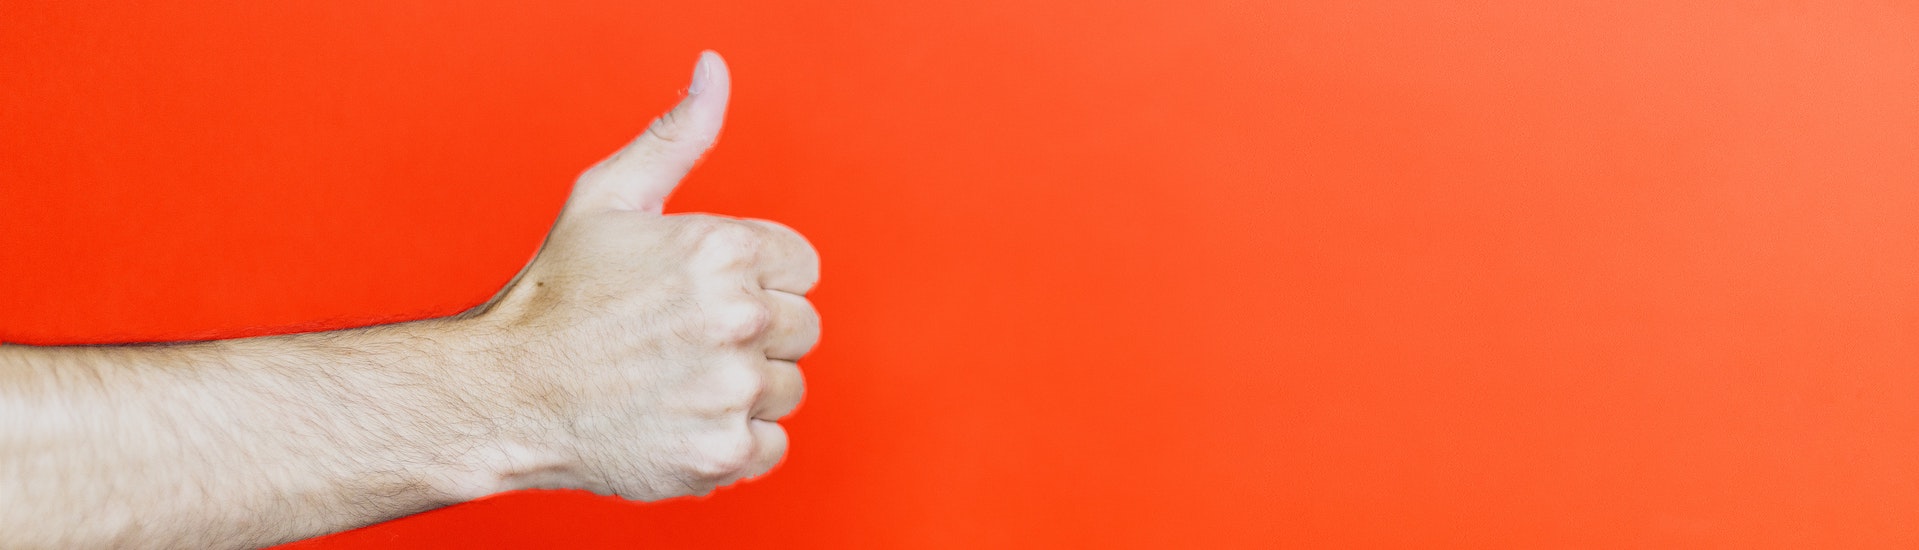 Thumbs up on a bright orange background